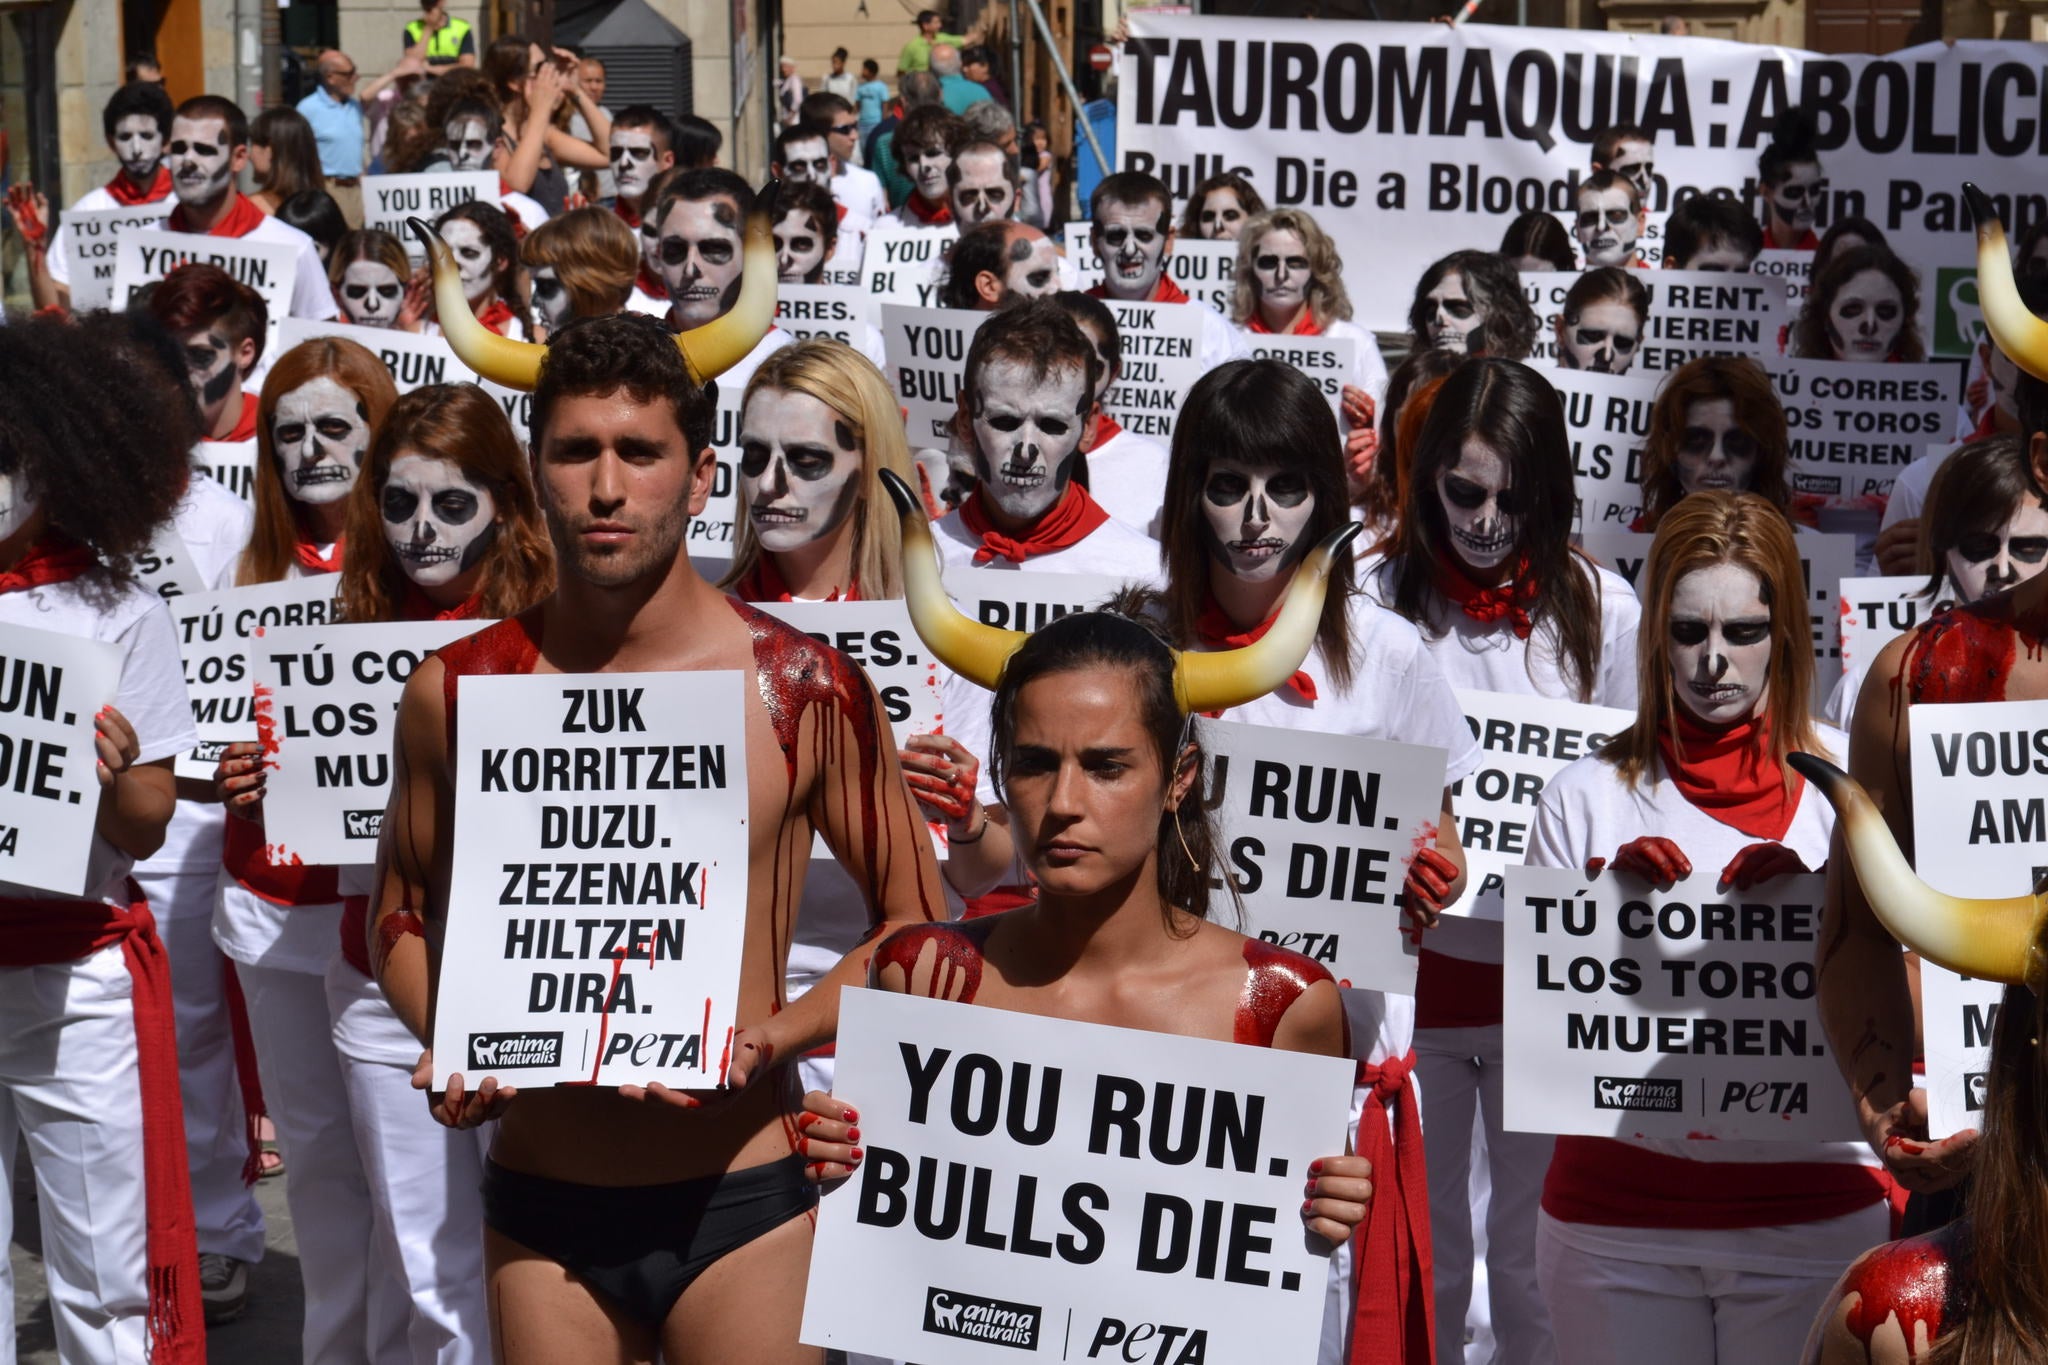 A protest against bullrunning today ahead of the San Fermin festival